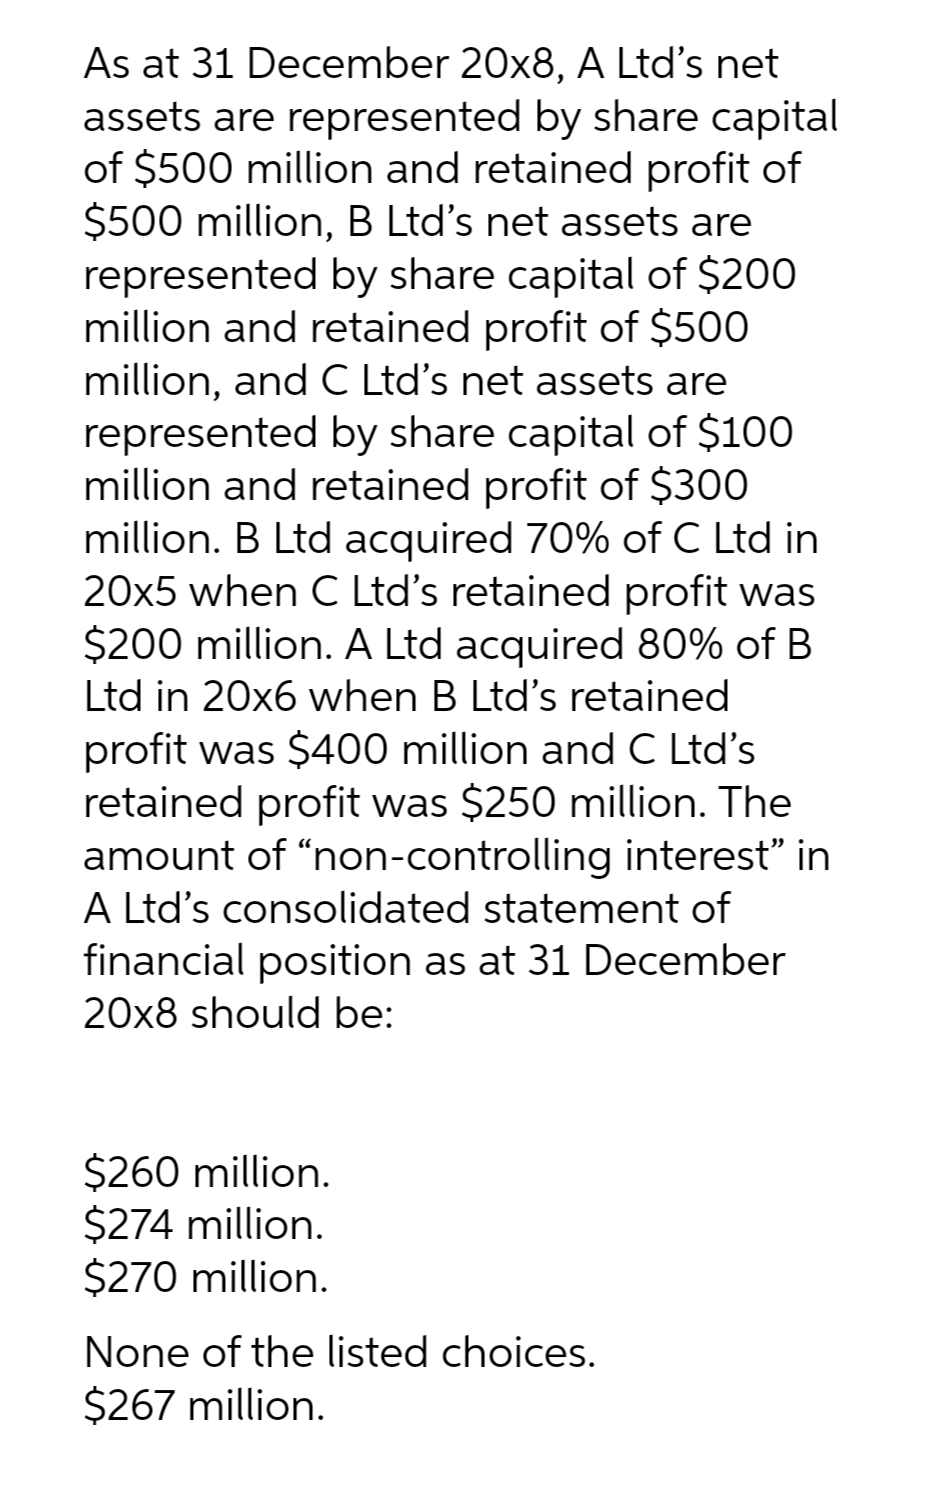 As at 31 December 20x8, A Ltd's net
assets are represented by share capital
of $500 million and retained profit of
$500 million, B Ltd's net assets are
represented by share capital of $200
million and retained profit of $500
million, and C Ltd's net assets are
represented by share capital of $100
million and retained profit of $300
million. B Ltd acquired 70% of C Ltd in
20x5 when C Ltd's retained profit was
$200 million. A Ltd acquired 80% of B
Ltd in 20x6 when B Ltd's retained
profit was $400 million and C Ltd's
retained profit was $250 million. The
amount of "non-controlling interest” in
A Ltd's consolidated statement of
financial position as at 31 December
20x8 should be:
$260 million.
$274 million.
$270 million.
None of the listed choices.
$267 million.